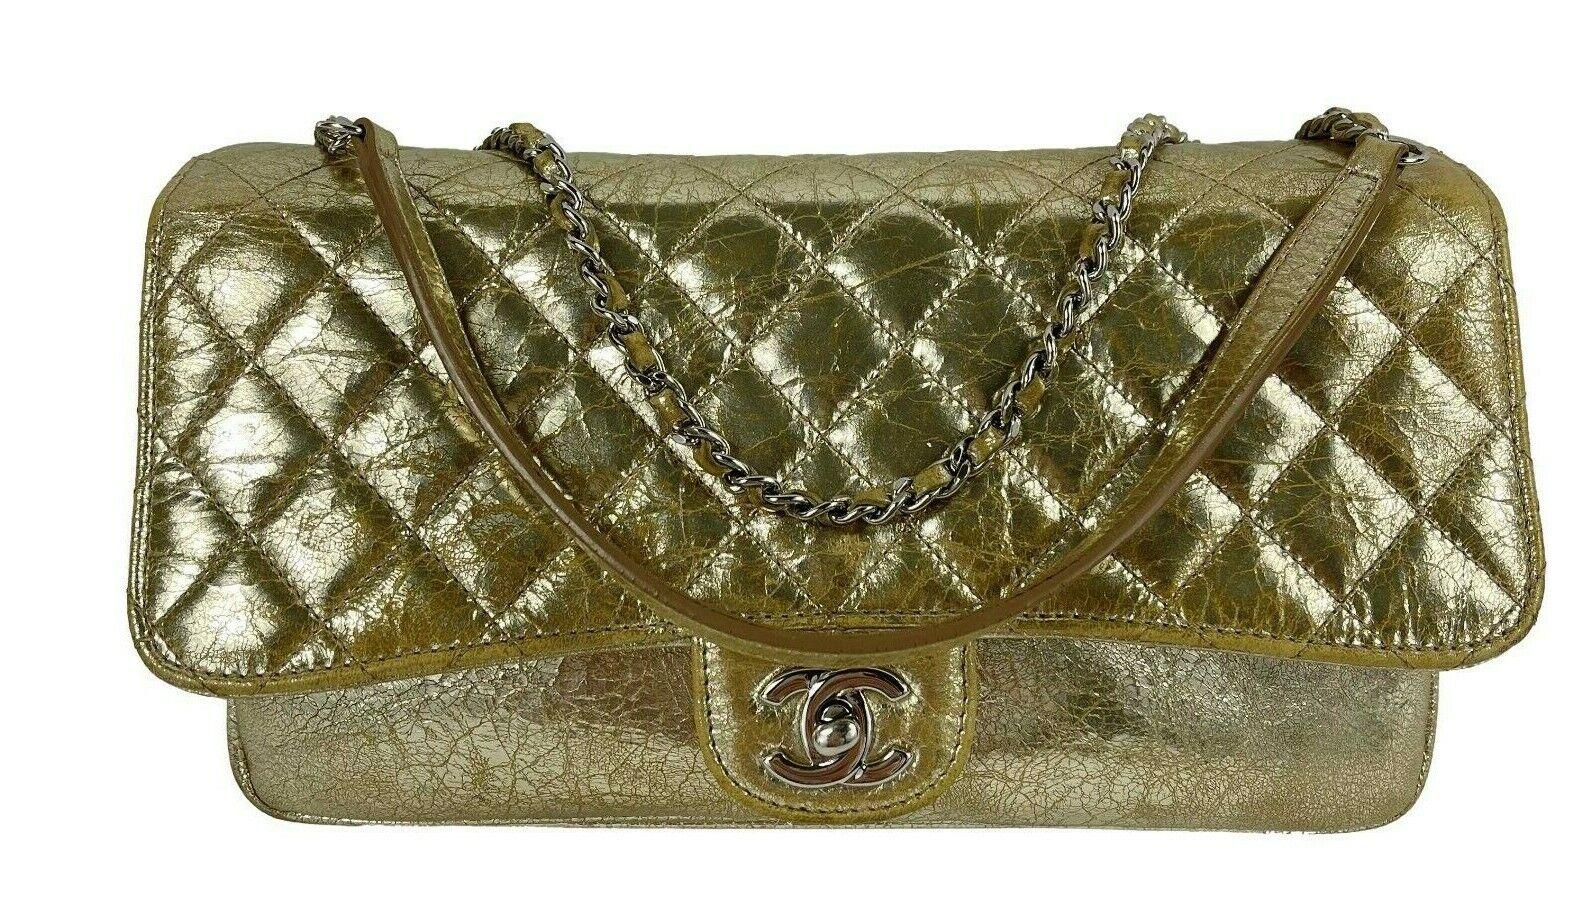 CHANEL Quilted Distressed Glazed Gold Leather Accordion Flap Shoulder Bag Medium 7